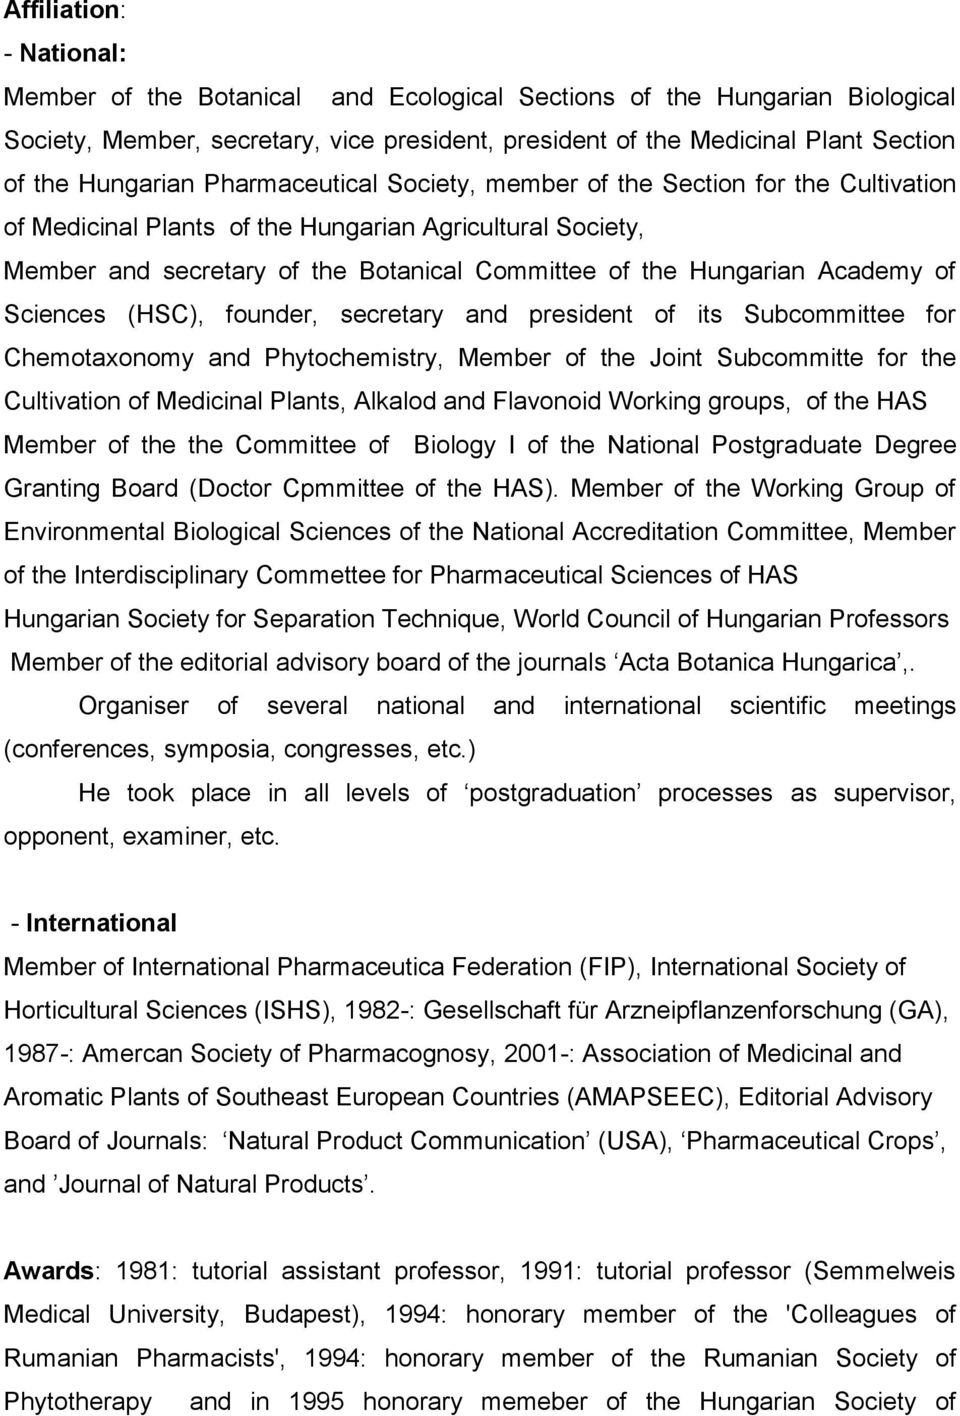 Academy of Sciences (HSC), founder, secretary and president of its Subcommittee for Chemotaxonomy and Phytochemistry, Member of the Joint Subcommitte for the Cultivation of Medicinal Plants, Alkalod